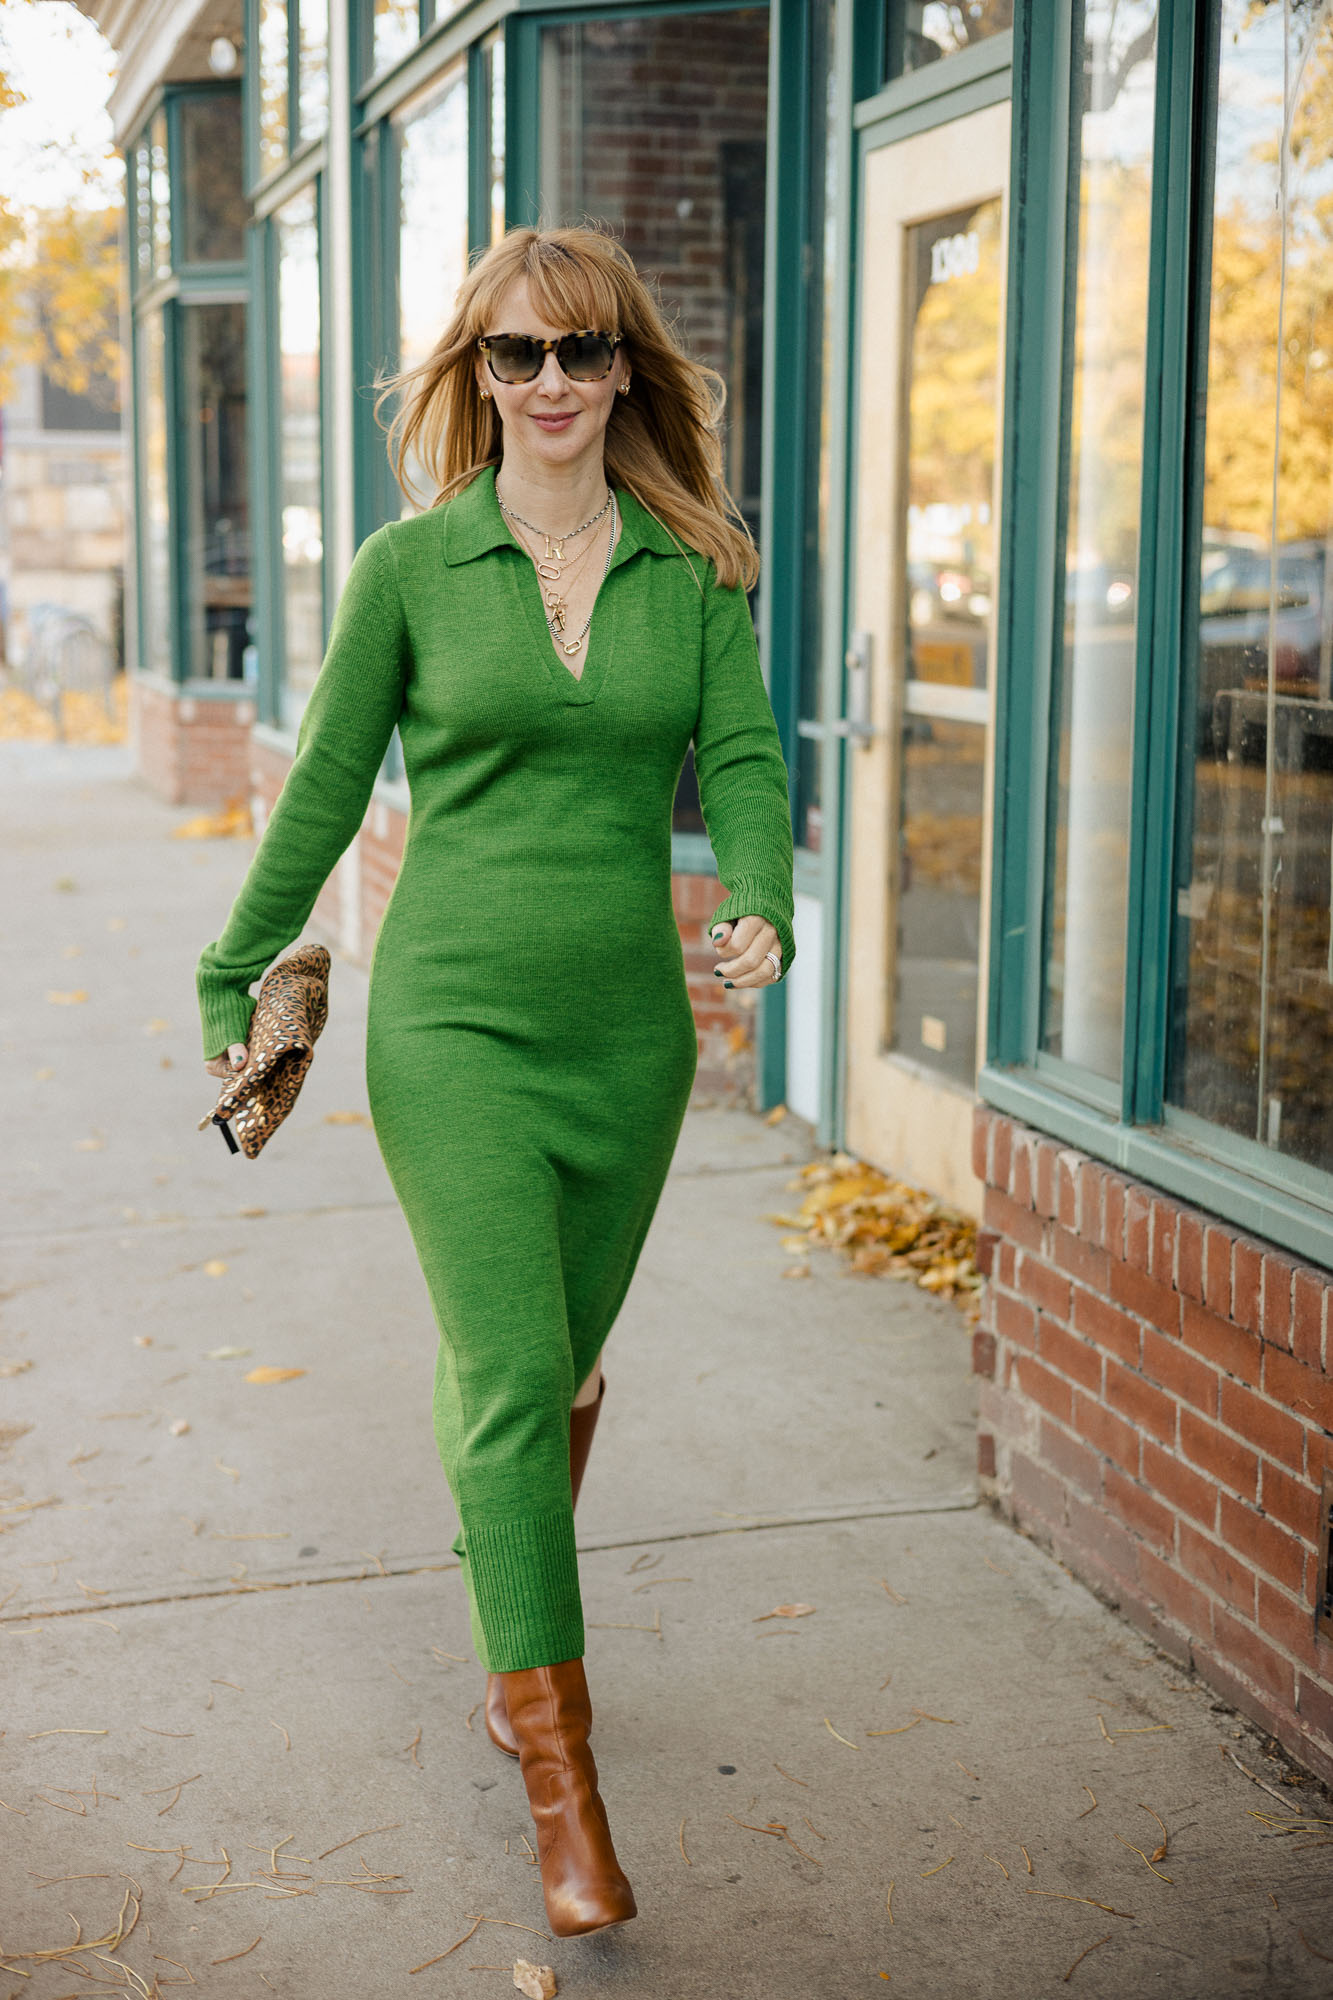 Walking down the street wearing a midi ddress by Staud in emeraldd green Loeffler Randall goldy boots in cognac and a Clare V leopard clutch.